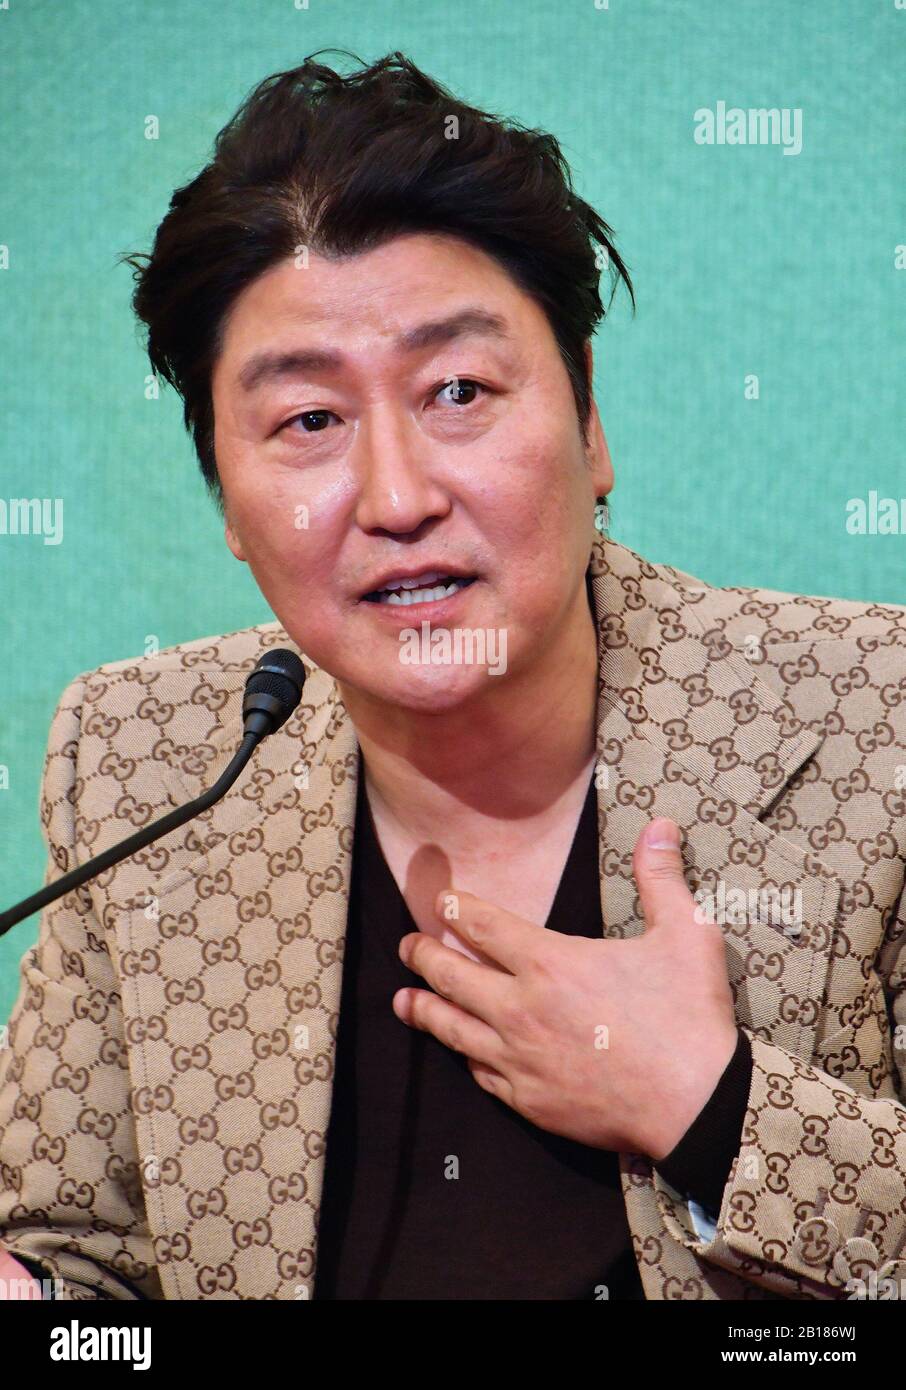 South Korean actor Song Kang-ho attends the press conference for Oscar winner of Best Original Screenplay, Best Director and Best Picture for 'Parasite' at the Japan national press club in Tokyo, Japan on February 23, 2020. Stock Photo